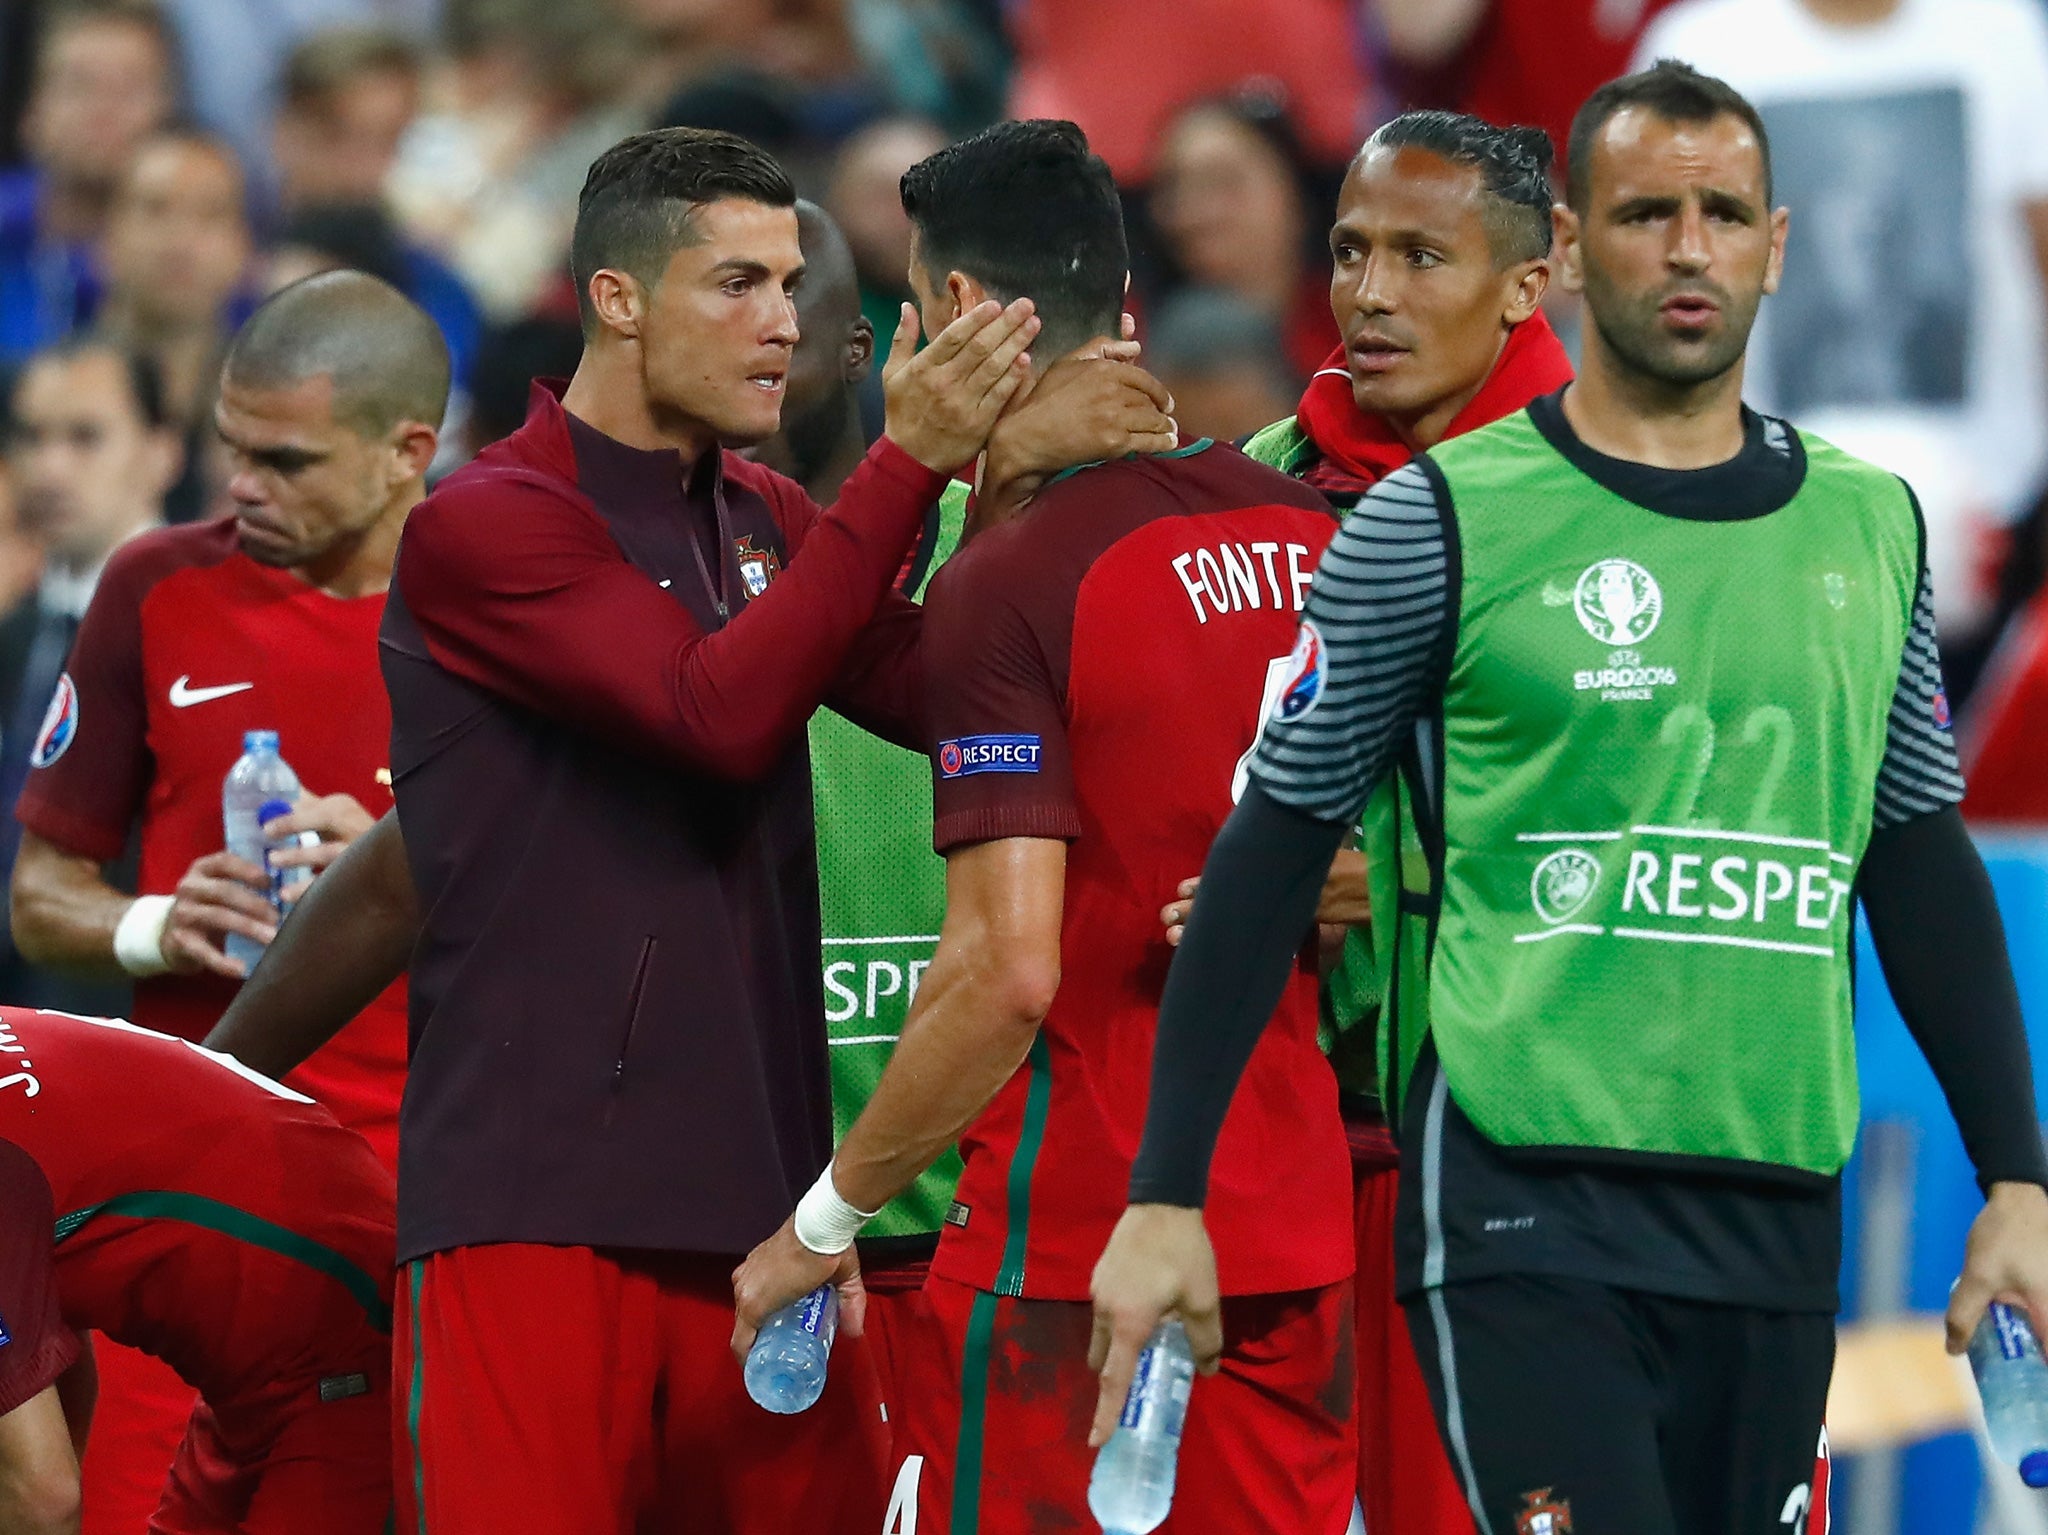 Ronaldo shares some words of encouragement with Jose Fonte at half-time in extra-time